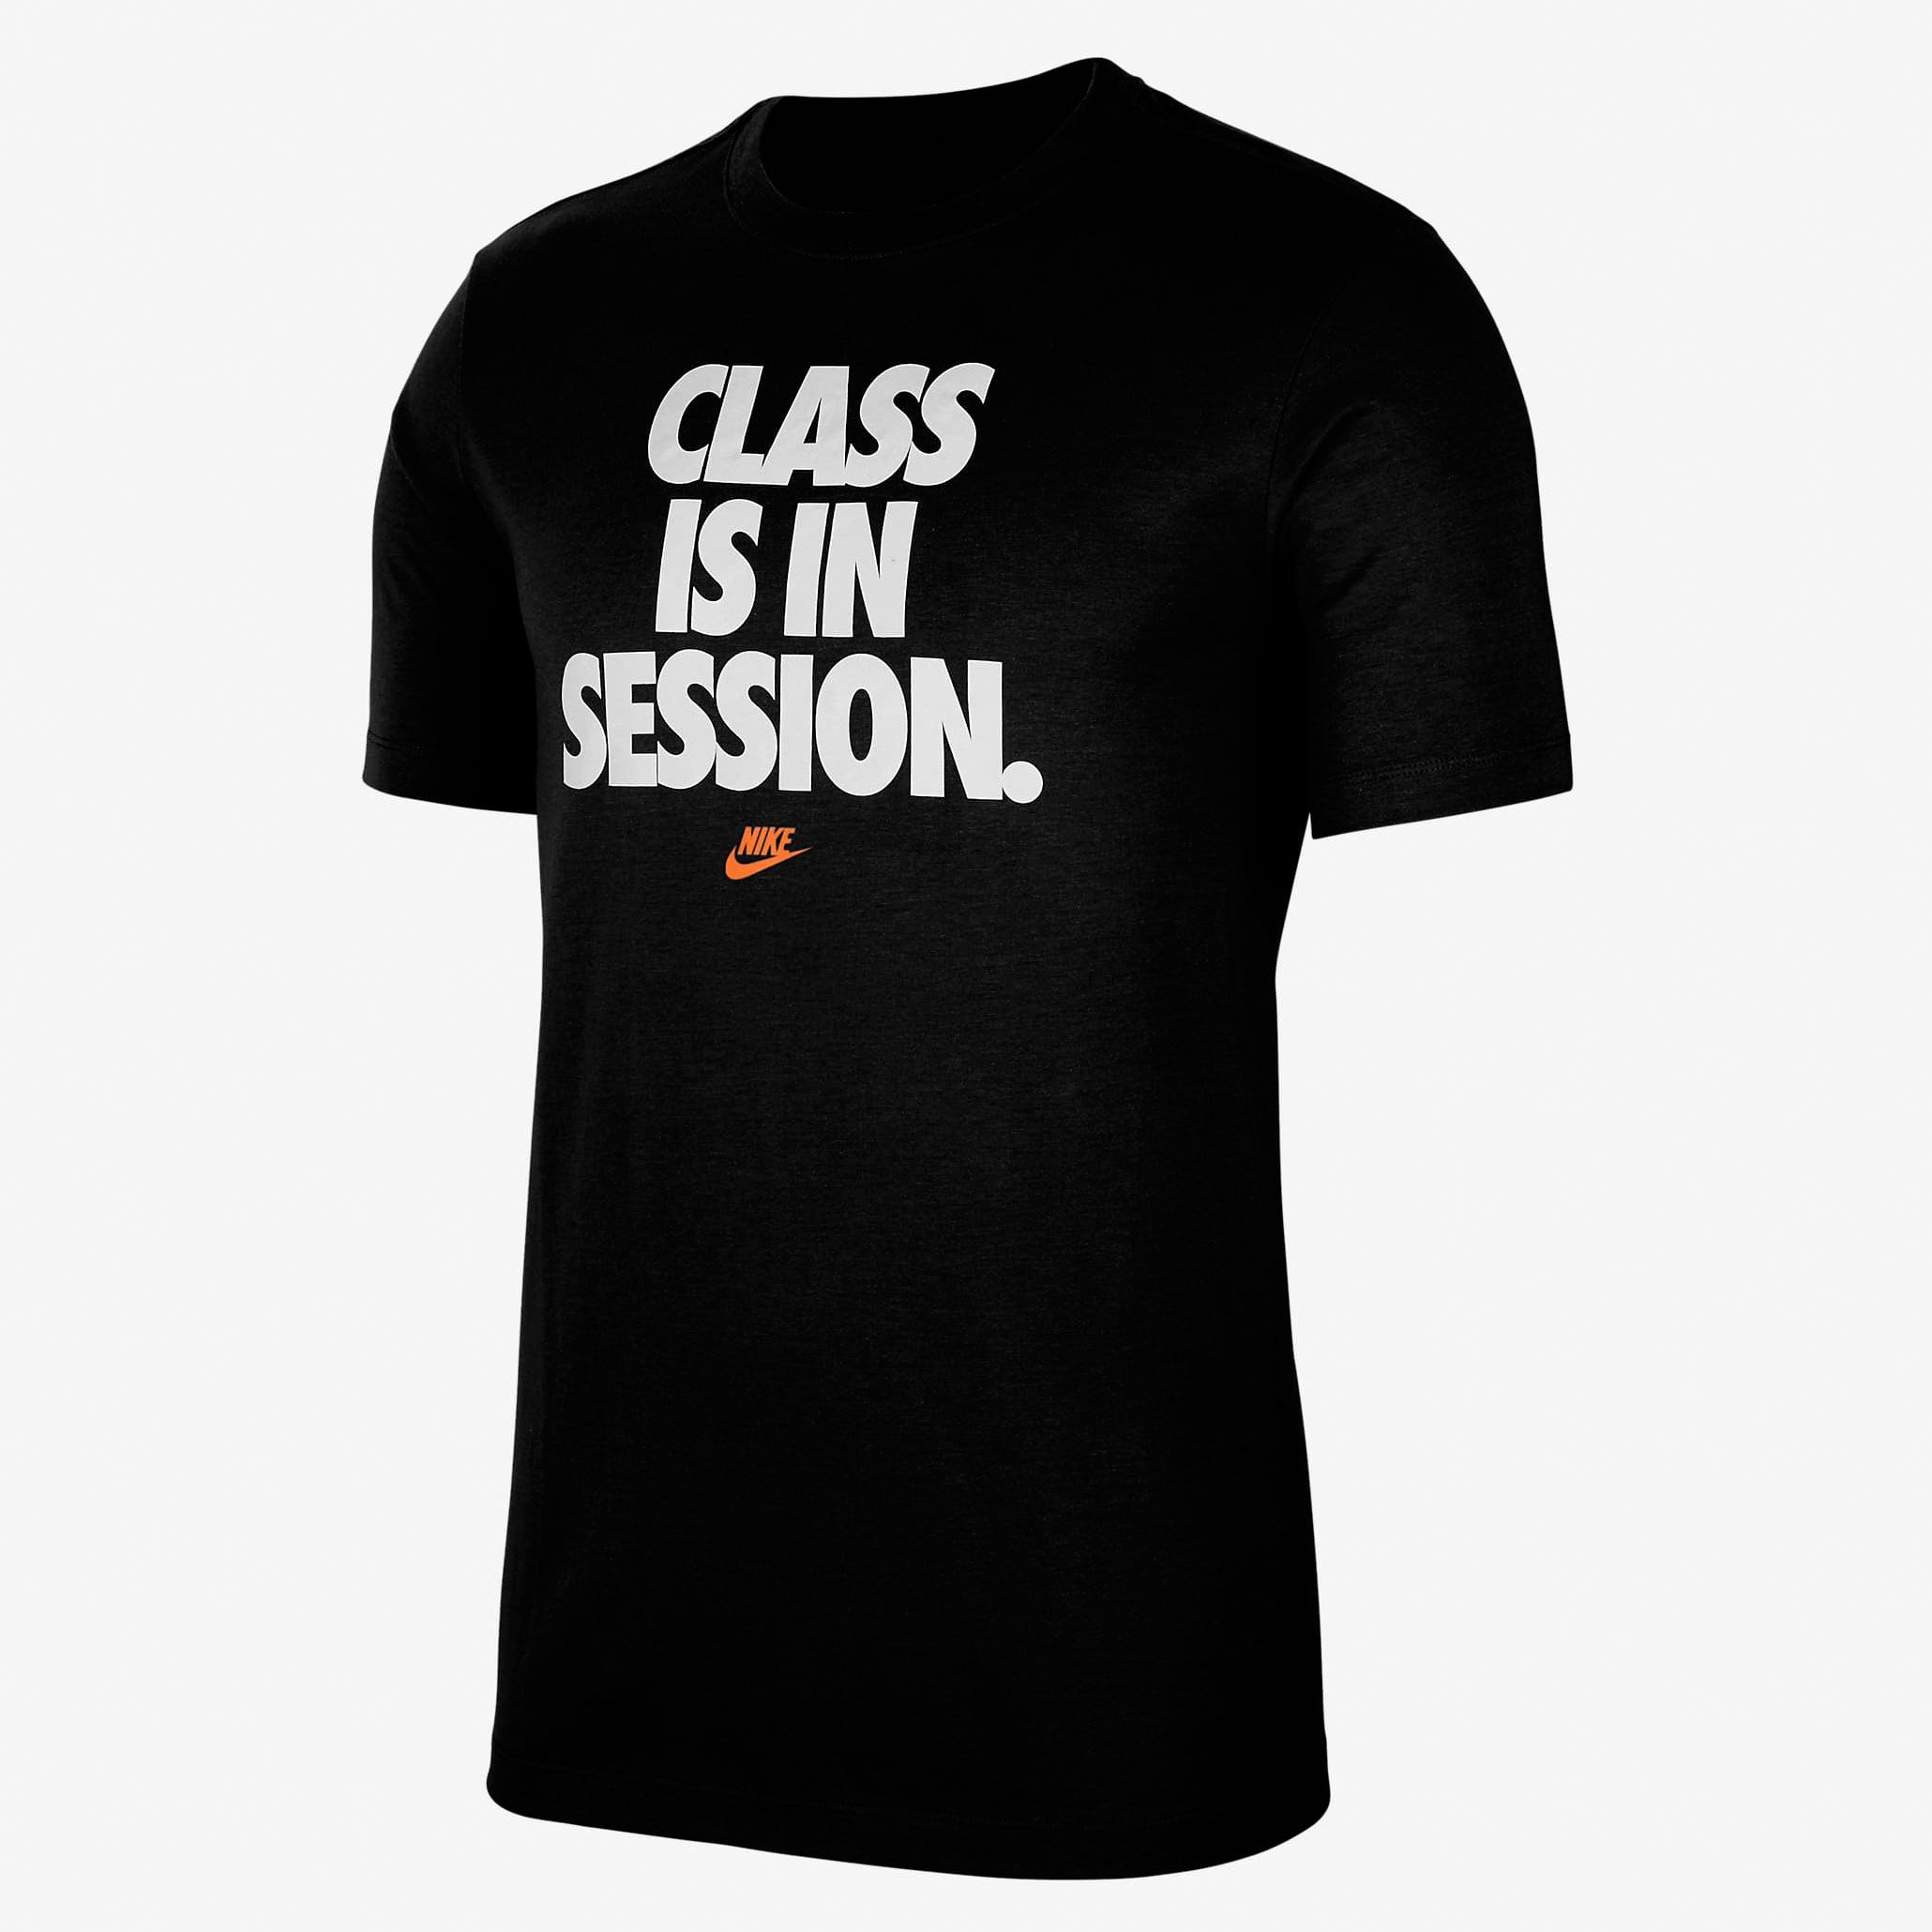 nike-class-is-in-session-shirt-black